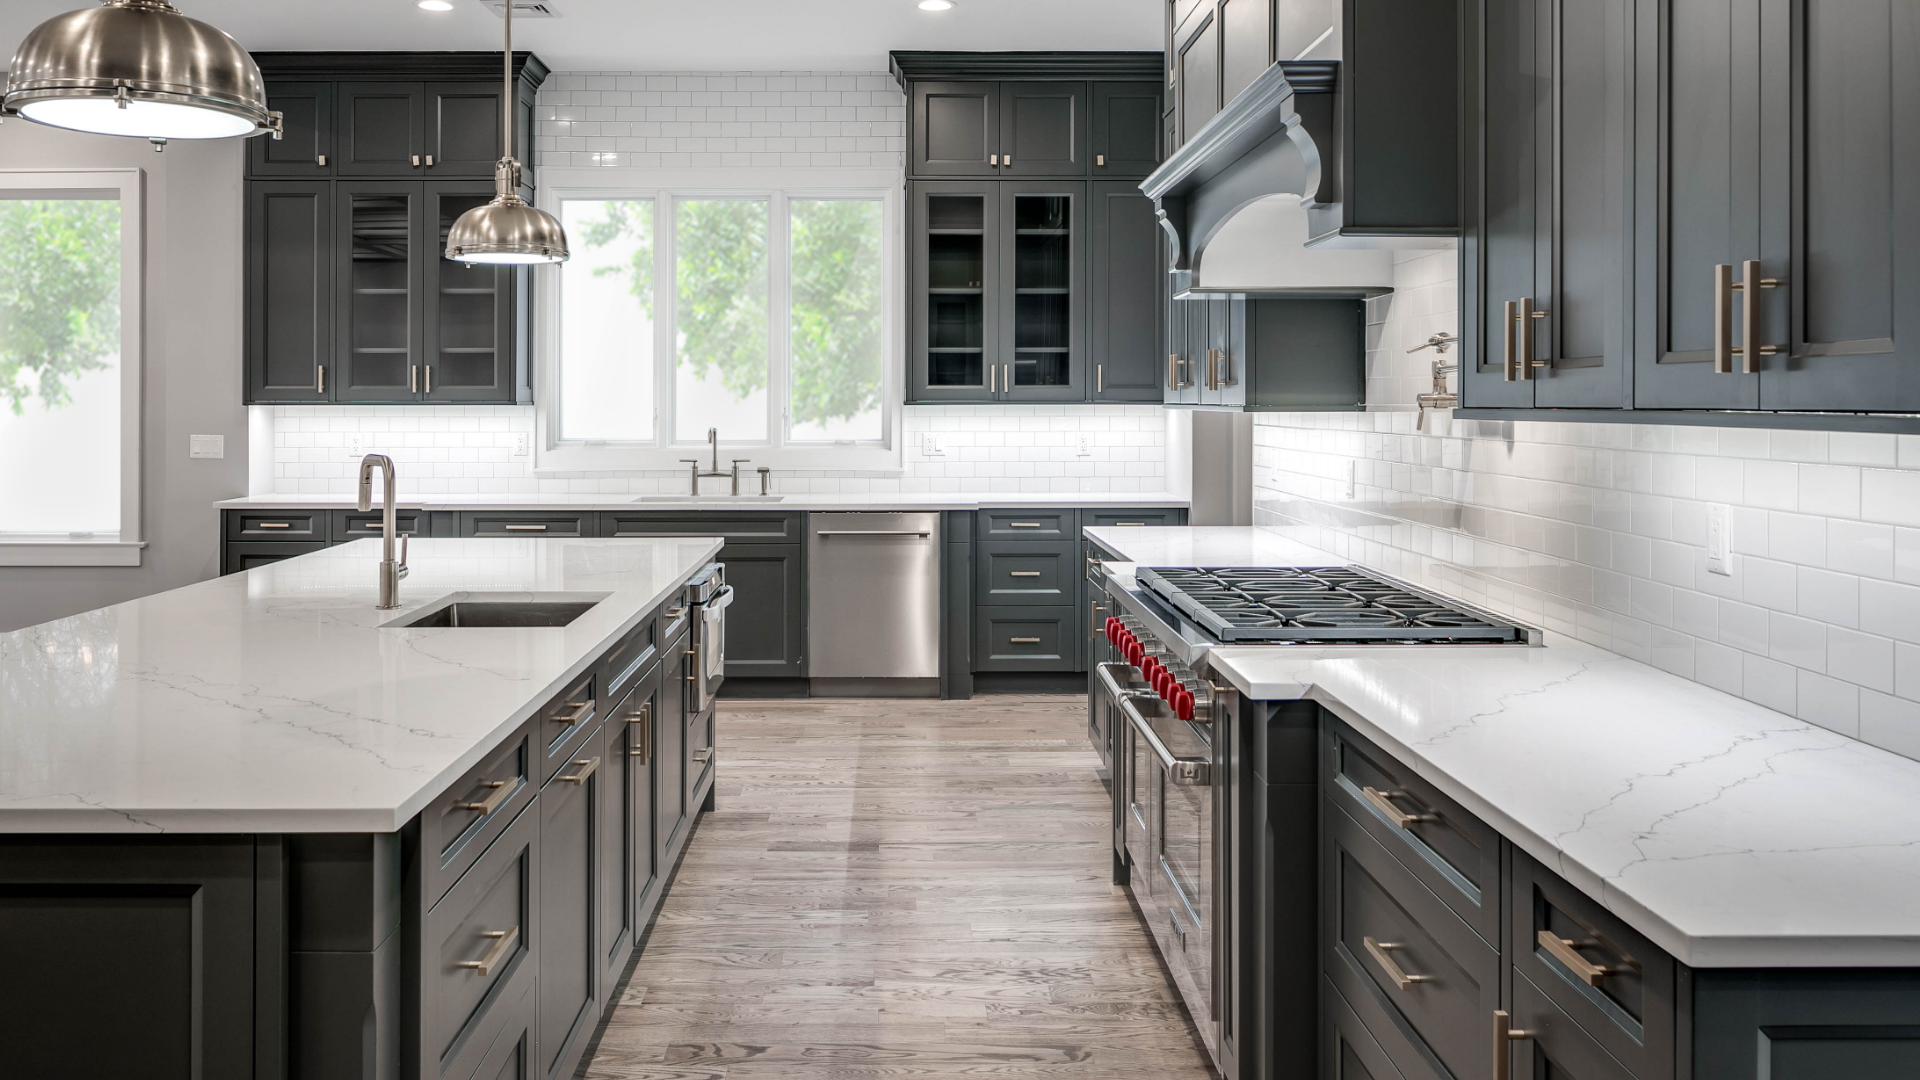 St. Martin kitchen design with Bellrose Peppercorn cabinets